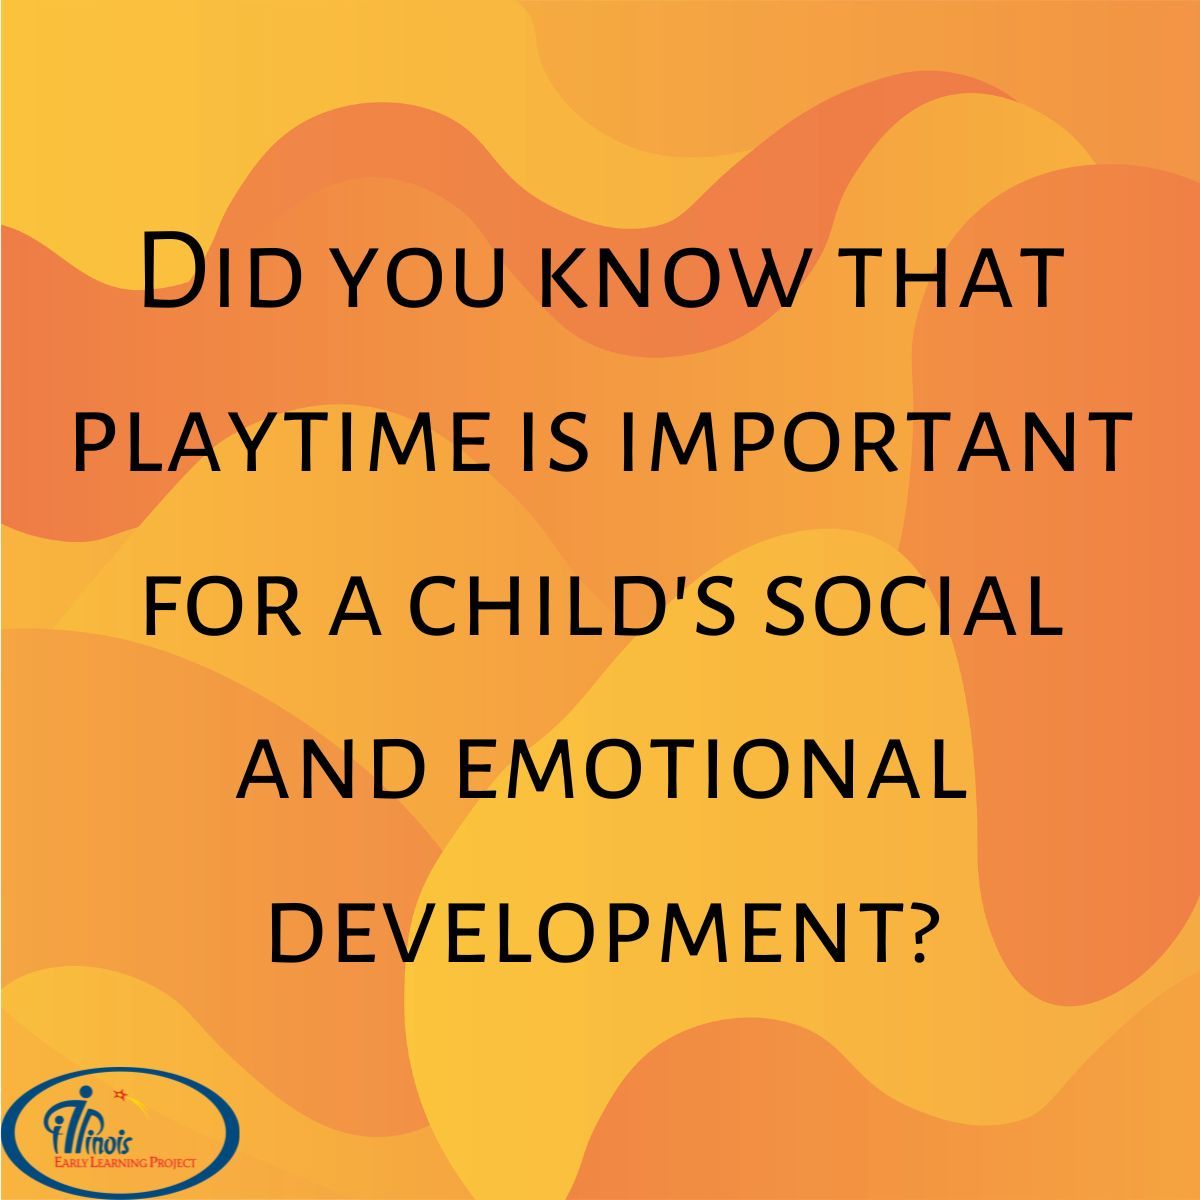 Did you know that playtime is important for a child's social and emotional development? 
#ChildDevelopment #IllinoisEarlyLearning